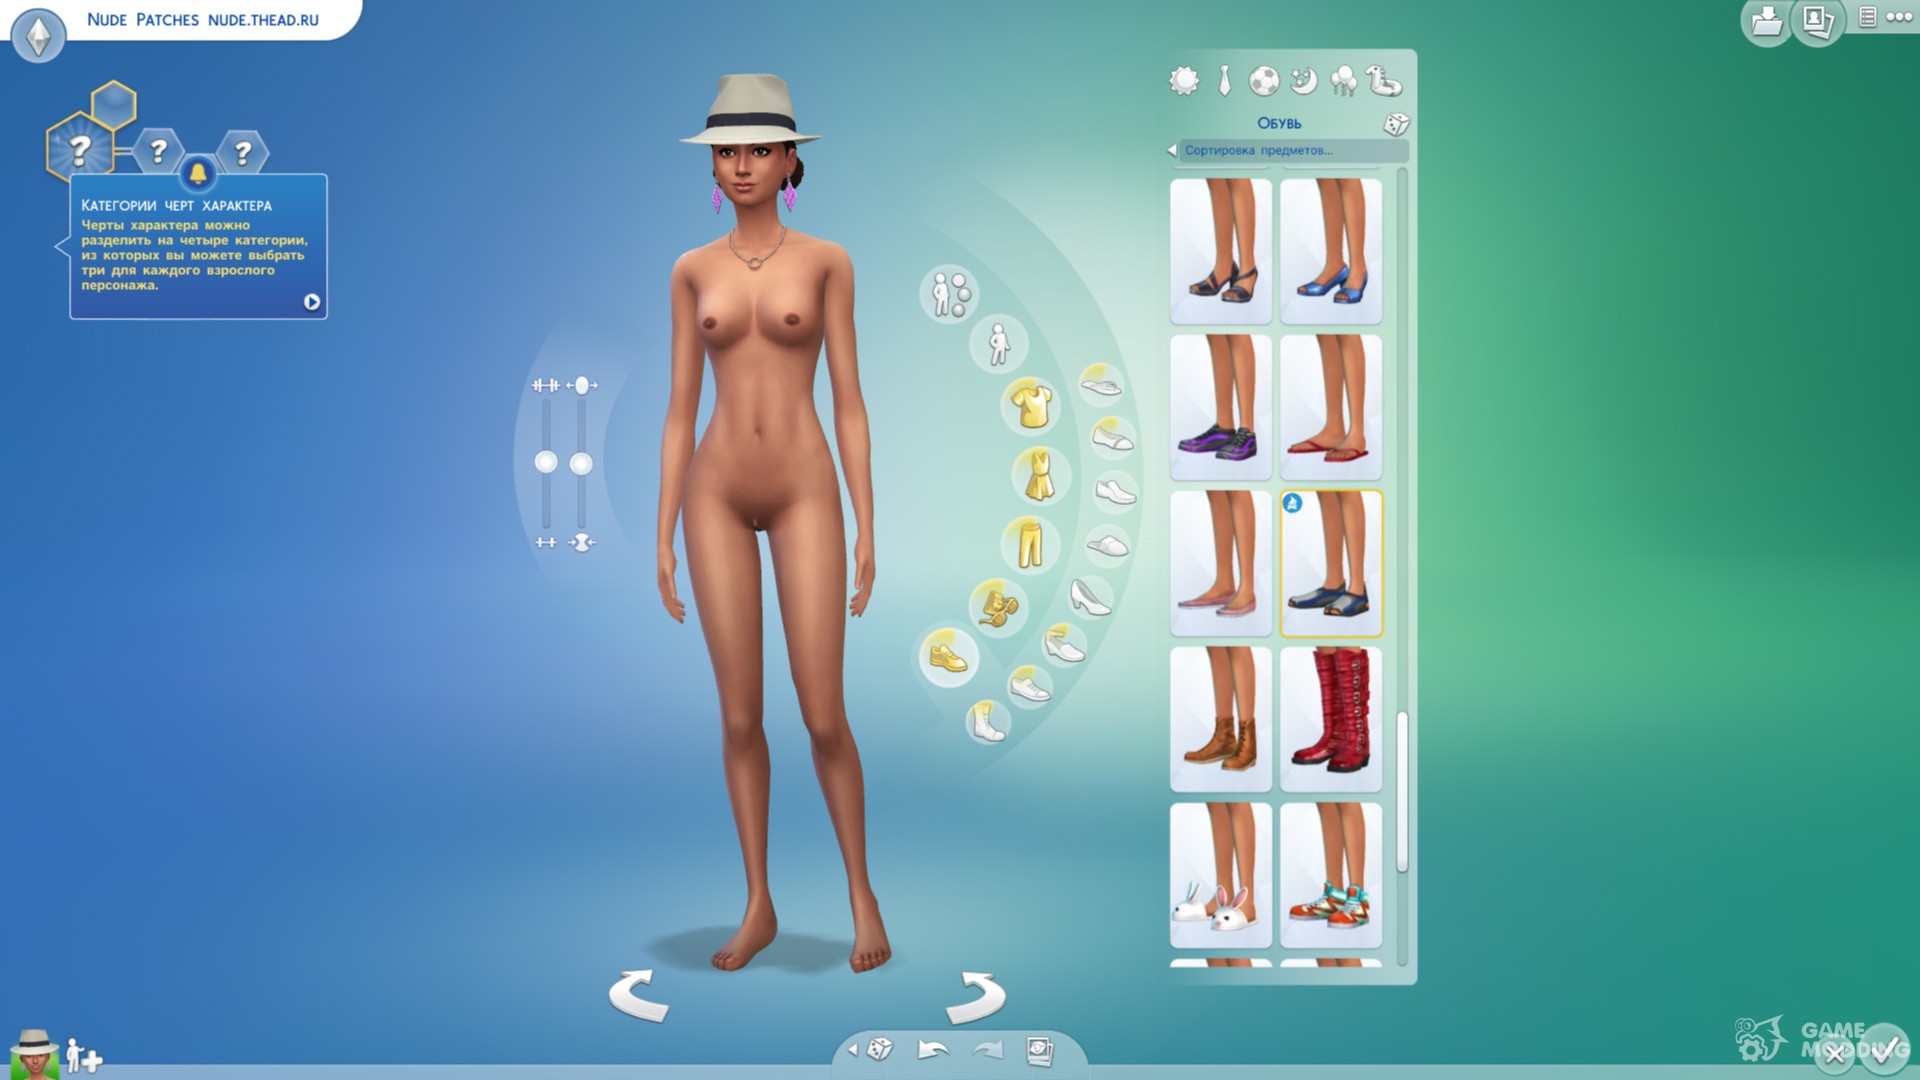 andrew nims recommends Sims 4 Nude Mode